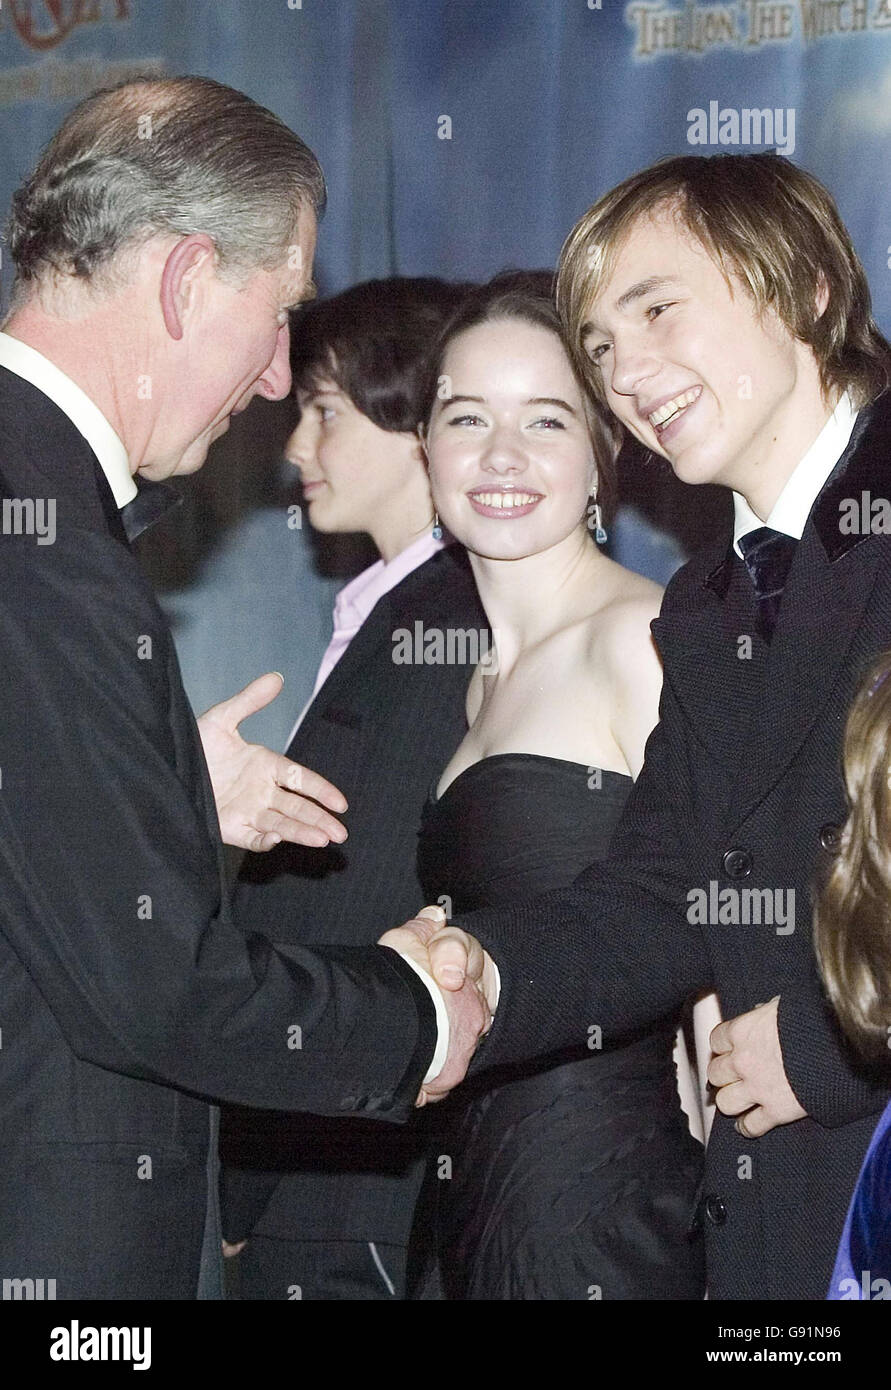 The Prince of Wales meets Anna Popplewell and William Moseley, two of the stars of the film 'The Chronicles of Narnia' at its world premiere in the Royal Albert Hall, London, Wednesday December 7, 2005. Photo credit should read: Leon Neal/AFP pool/PA. Stock Photo